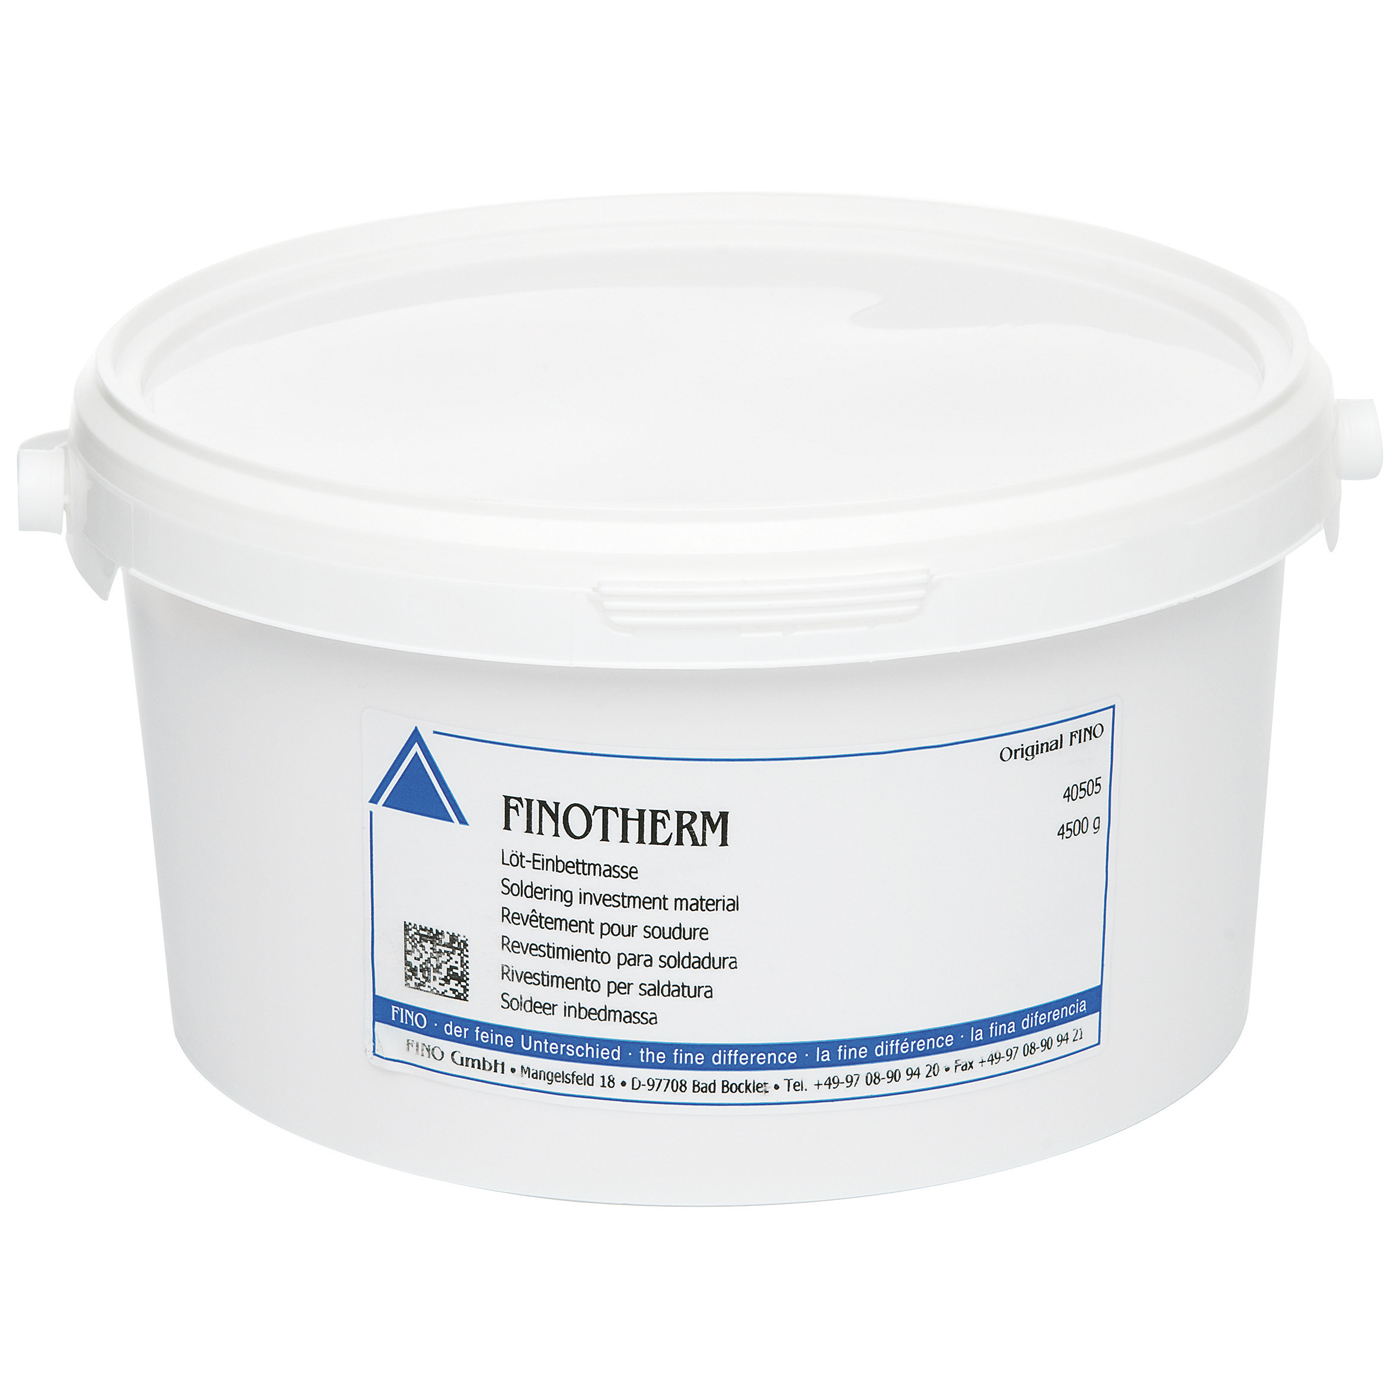 FINOTHERM Soldering Investment Material - 4500 g